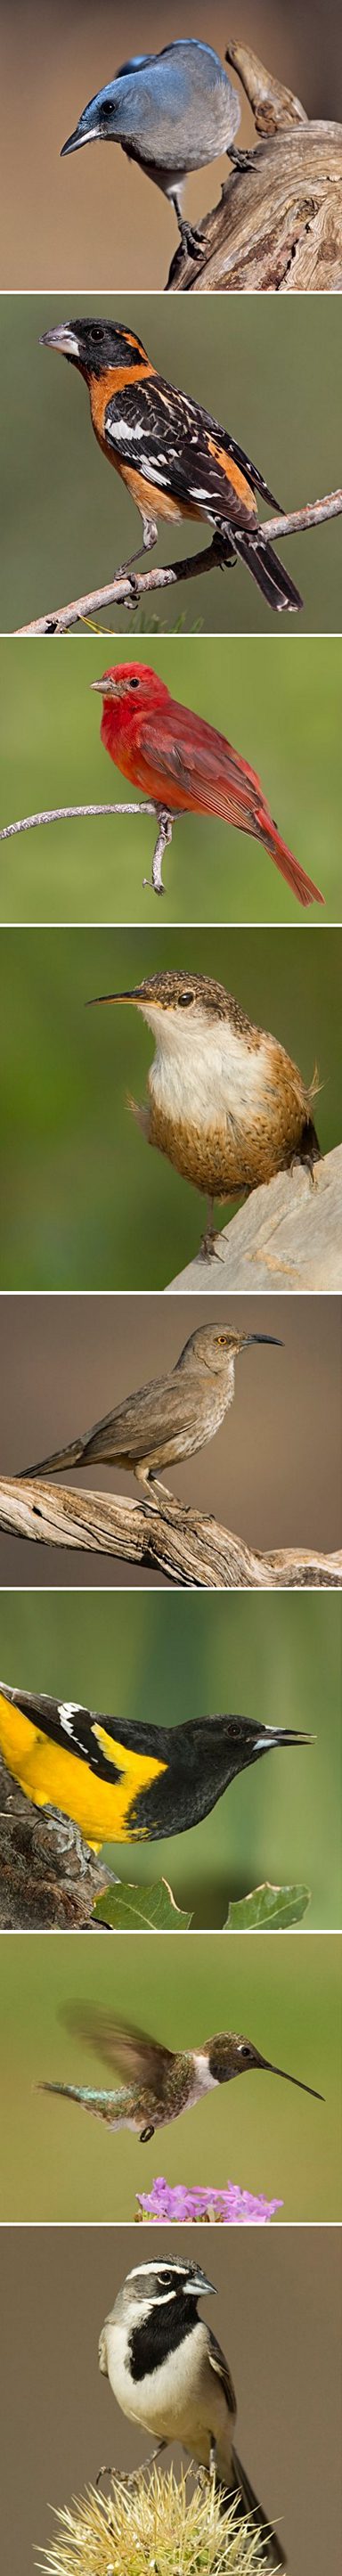 Top to bottom: Mexican Jay and Black-headed Grosbeak by Gary Kramer; Summer Tanager by David Speiser; Canyon Wren by Dave Welling; Curve-billed Thrasher and Scott’s Oriole by Tom Vezo/Minden Pictures; Black-chinned Hummingbird by Dave Welling; Black-throated Sparrow by Tom Vezo/Minden Pictures.